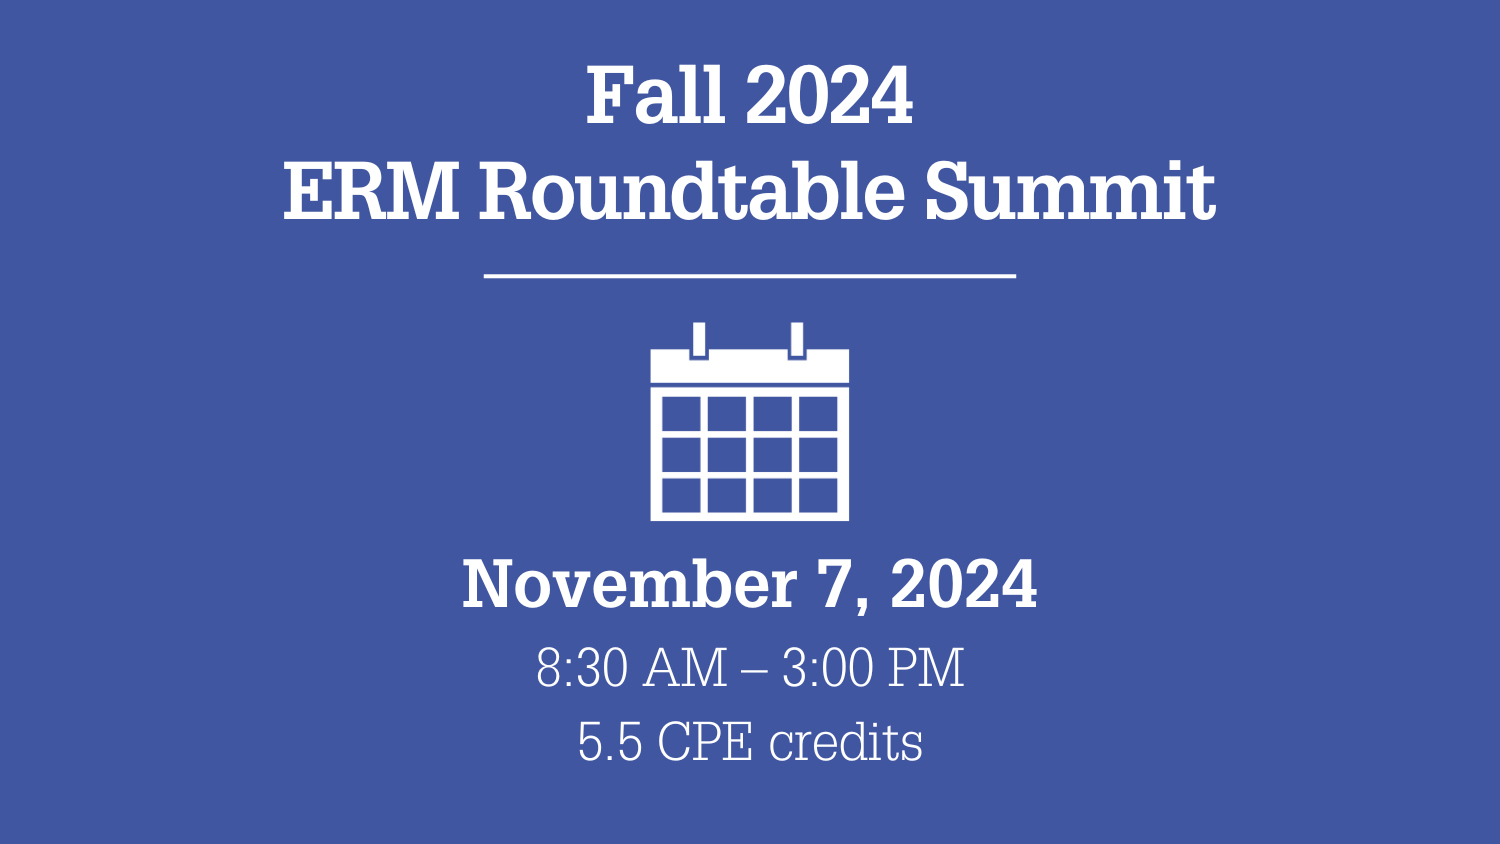 Fall 2024 ERM Roundtable Summit